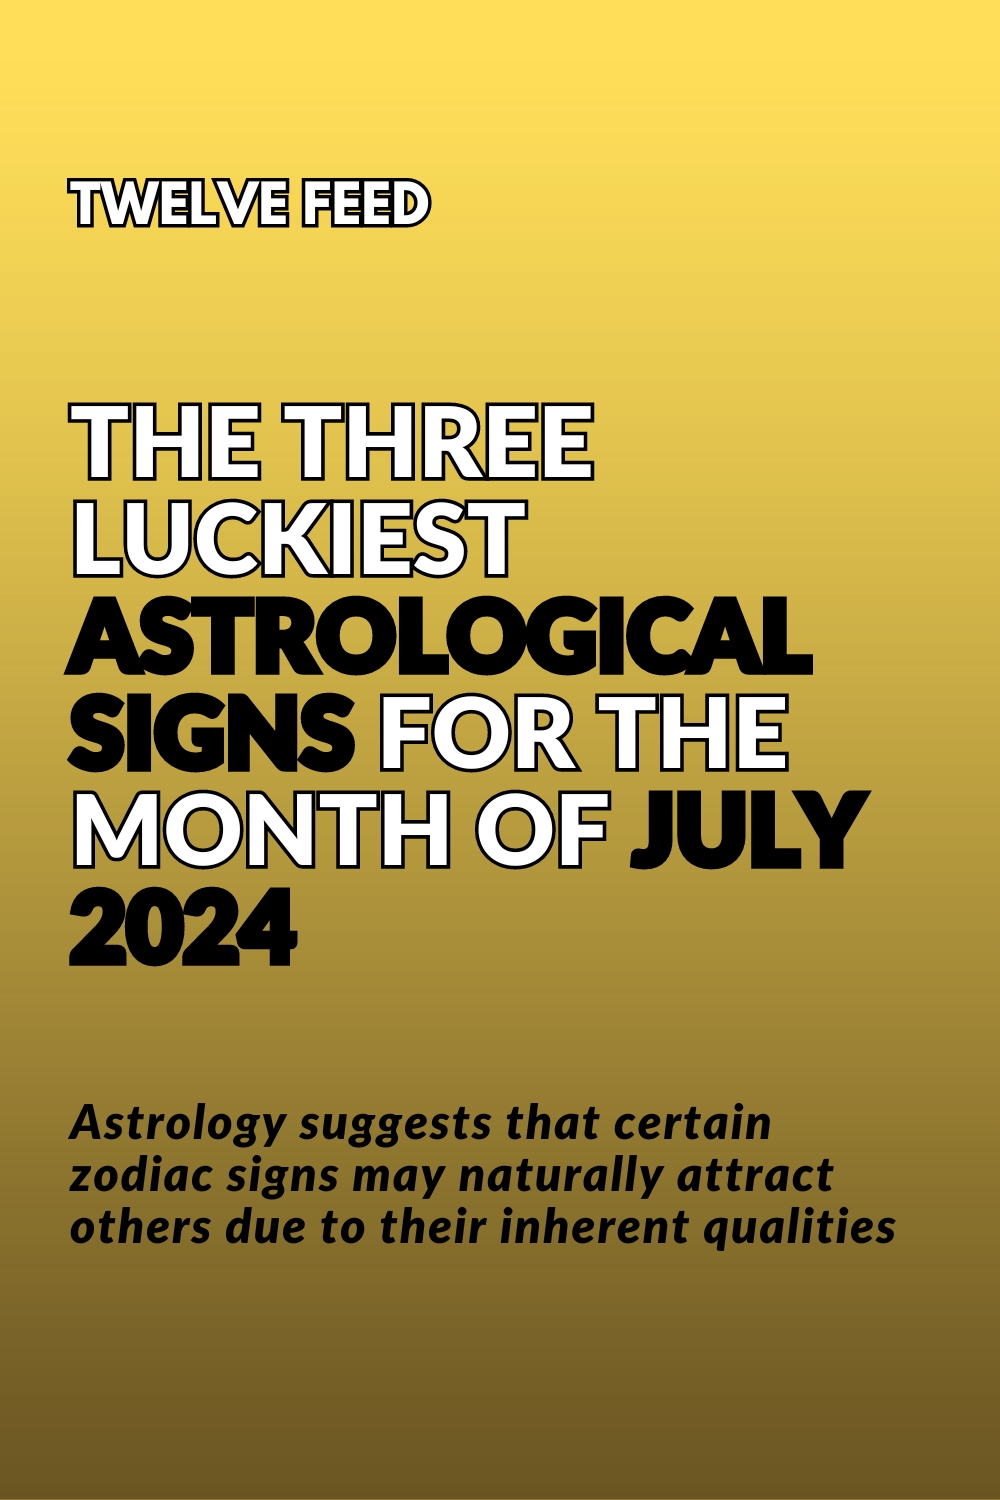 The Three Luckiest Astrological Signs For The Month Of July 2024